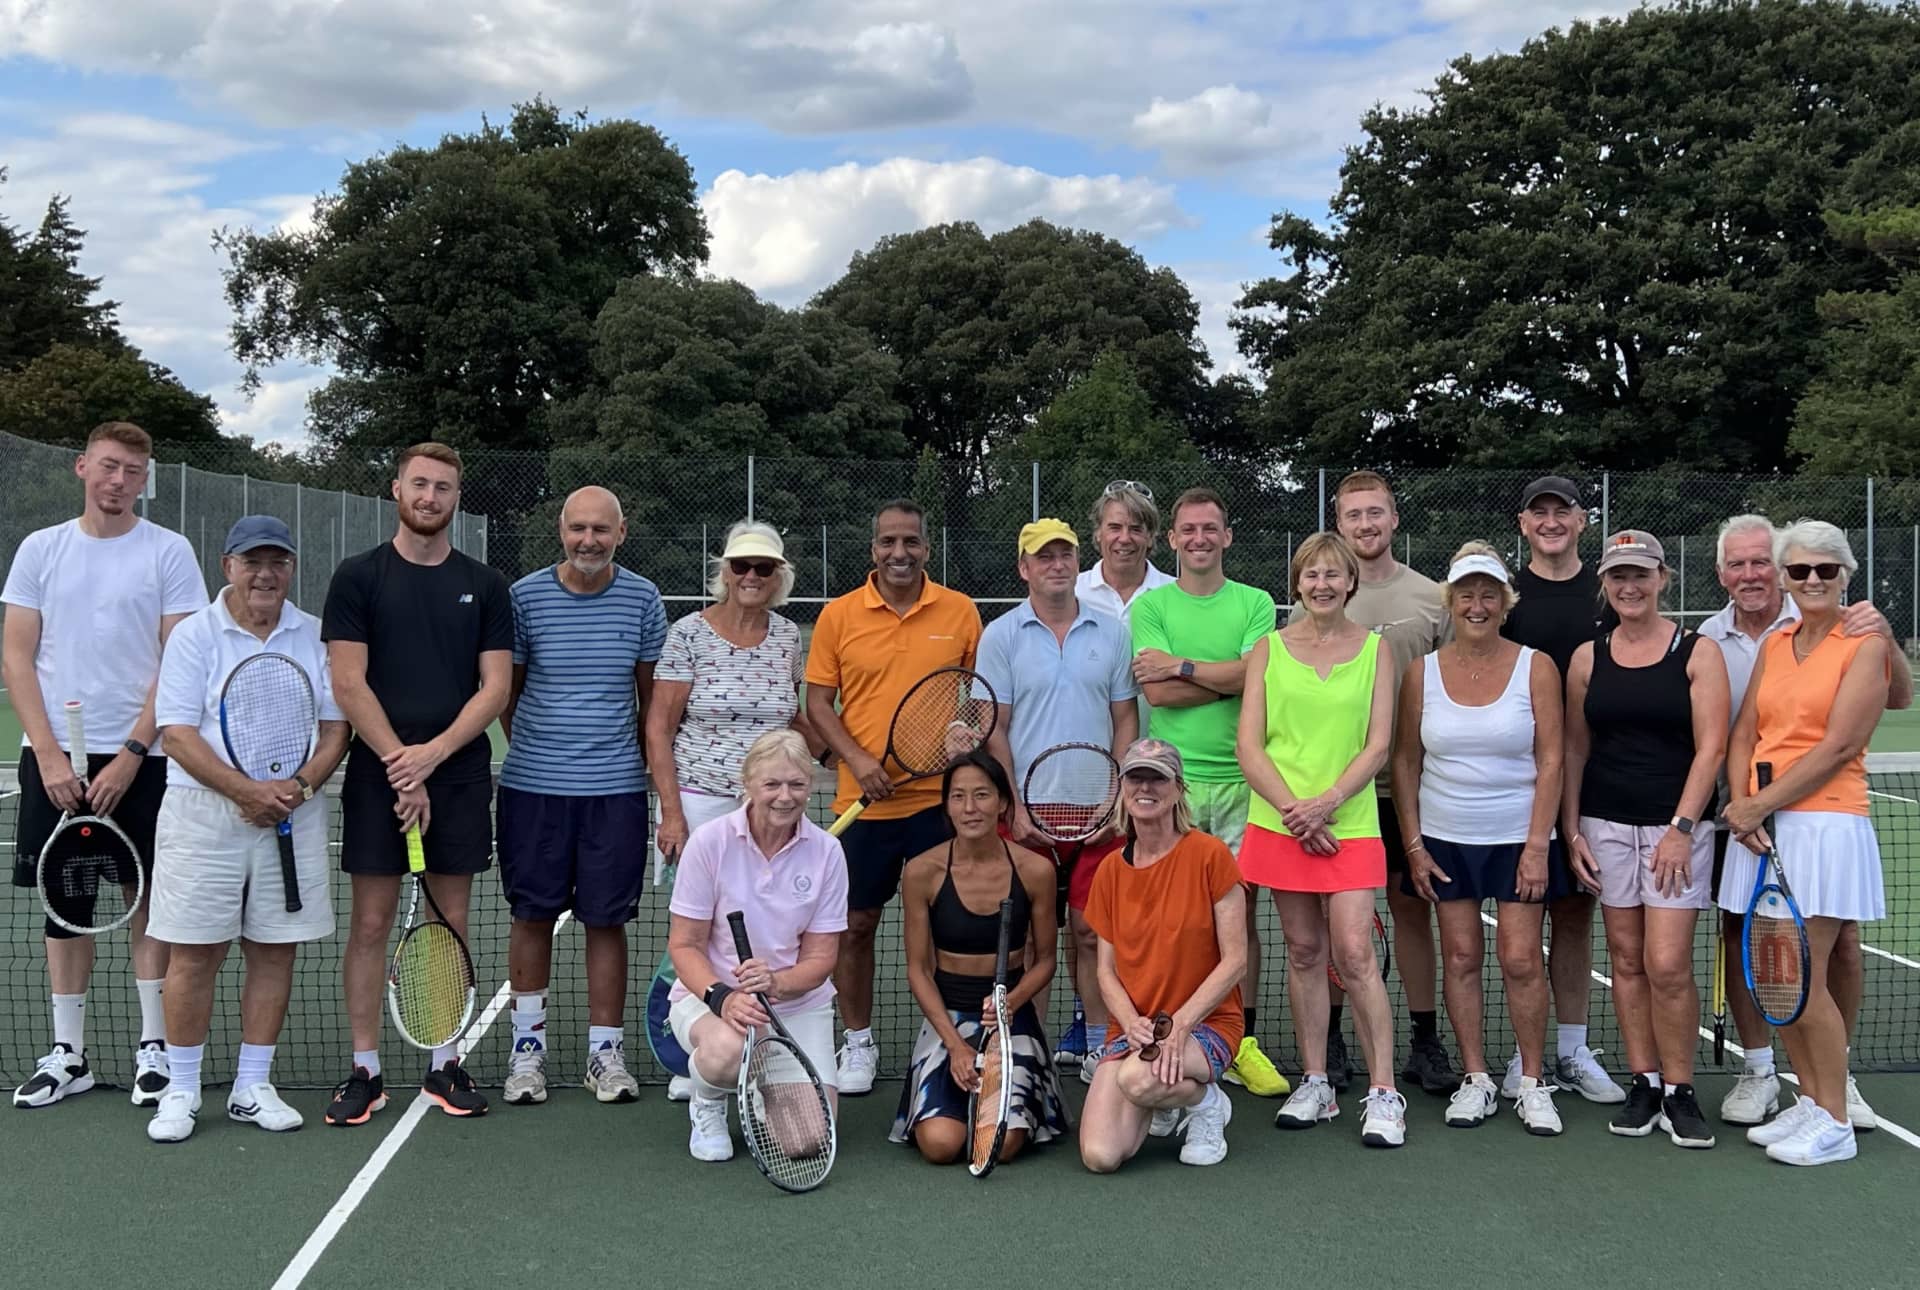 Cowes Summer Tennis Championship players